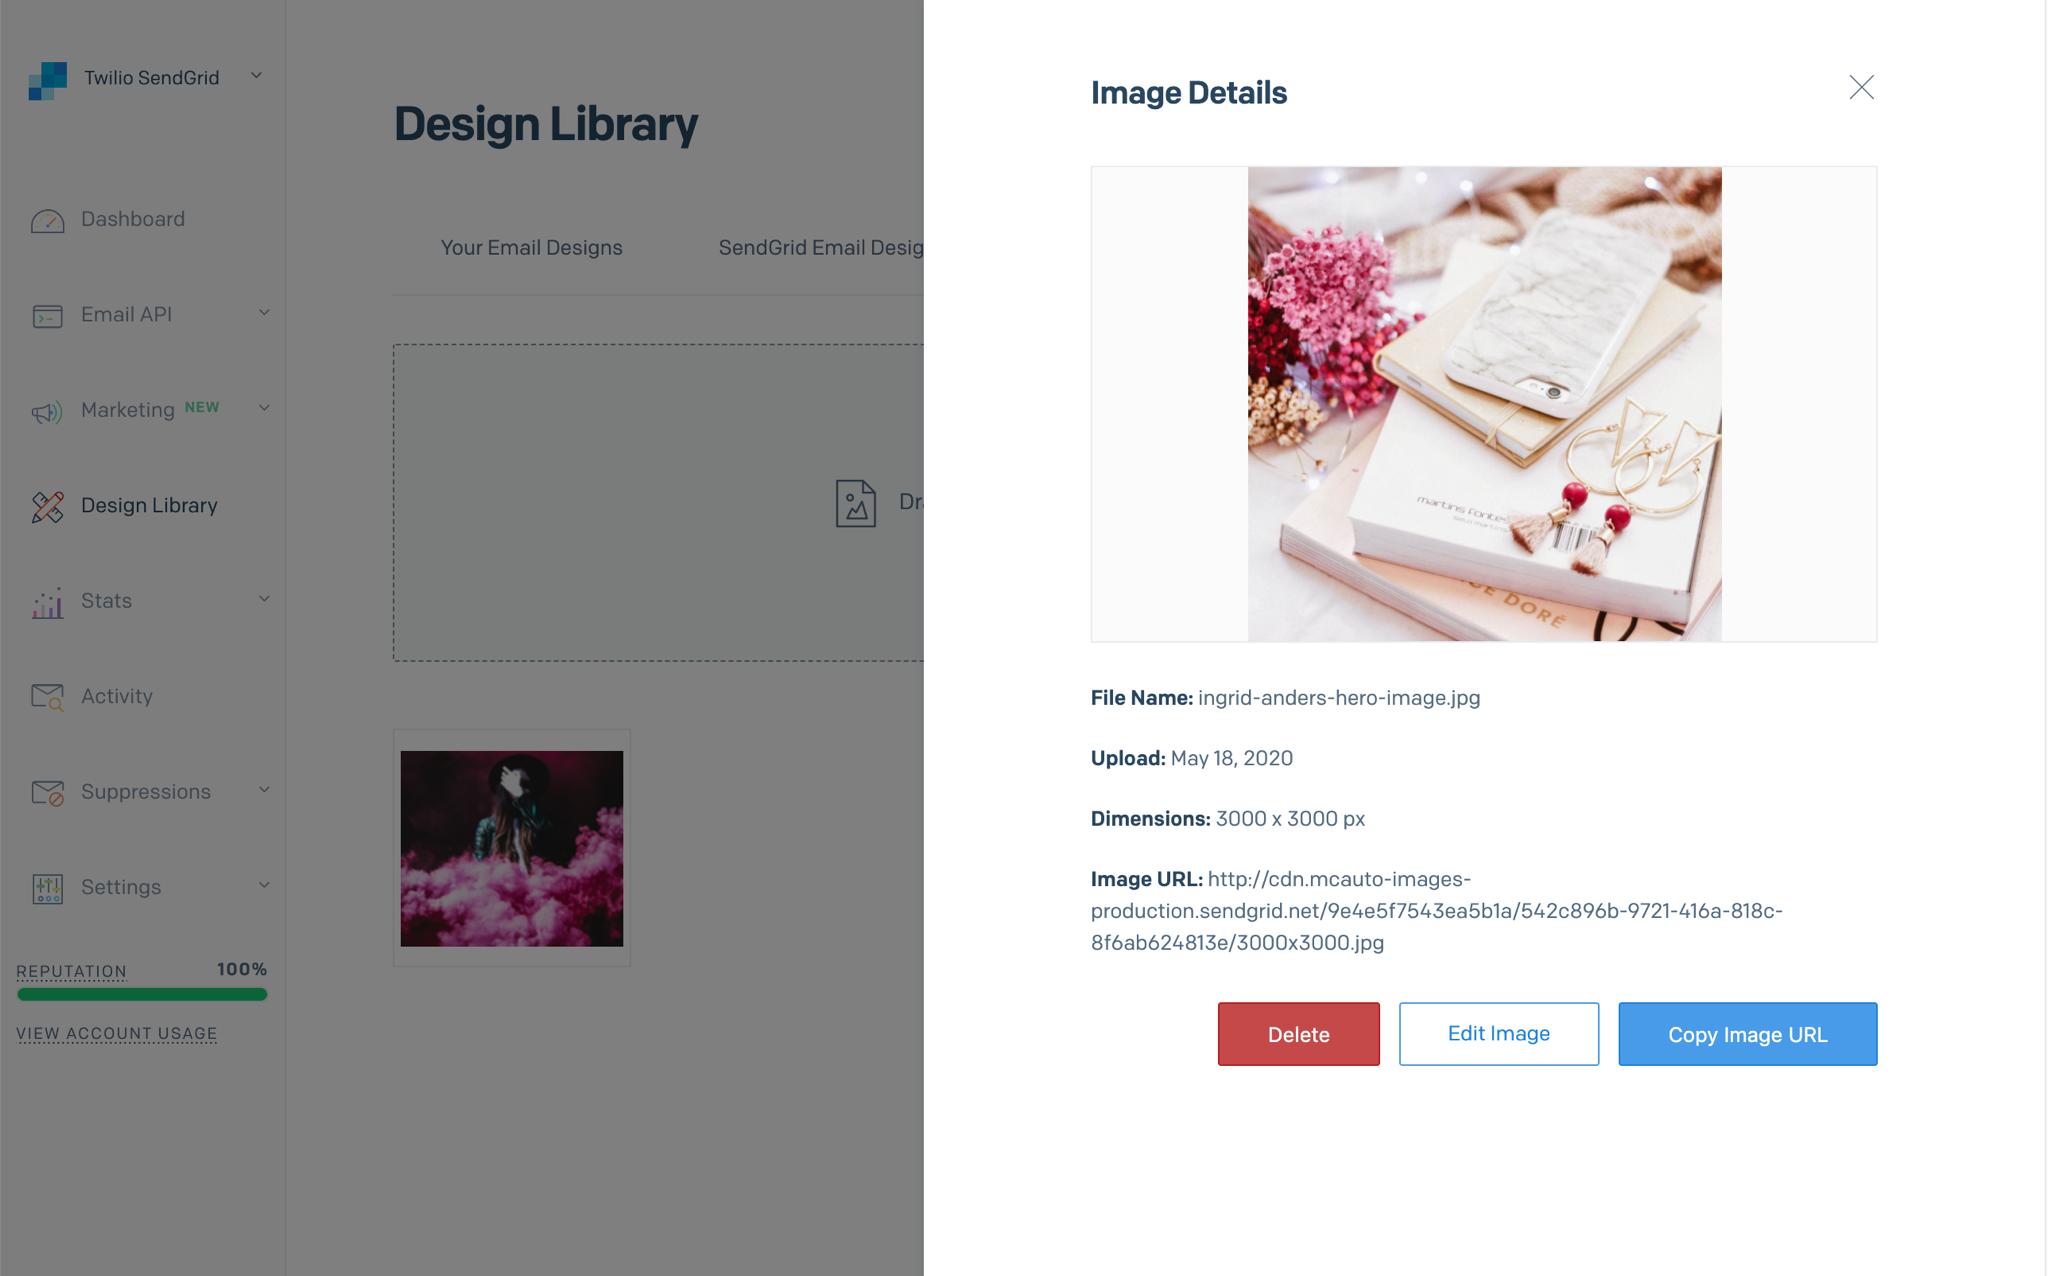 A sidebar modal showing an image's details and allowing you to delete the image, edit the image, or copy the image's URL.